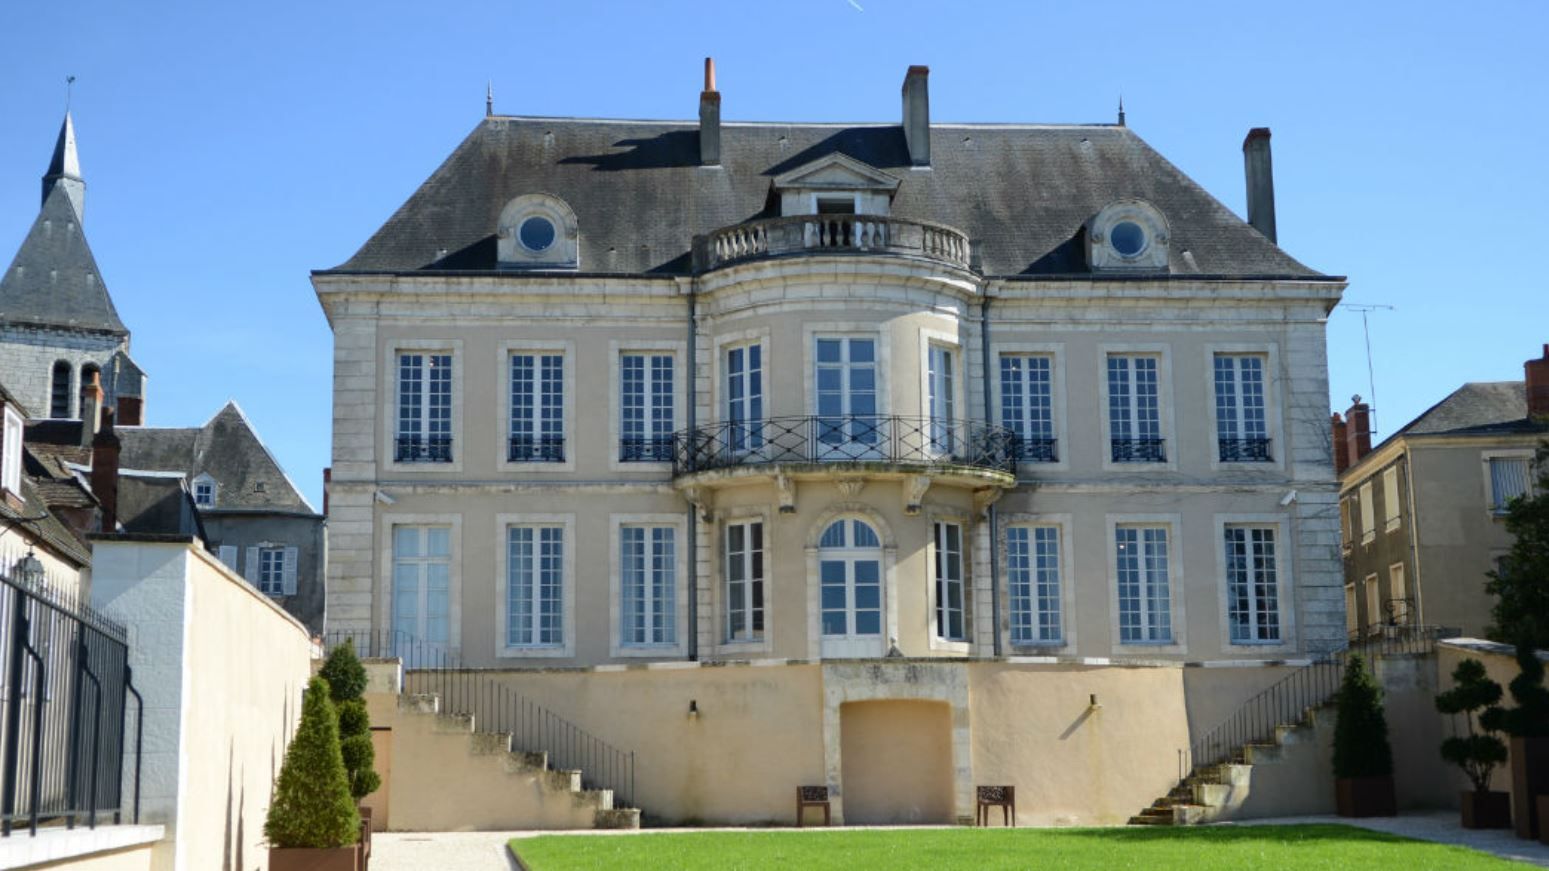 Musée de l’Hôtel Bertrand - Things To Do at Chateauroux Shooting Centre Paris Olympics 2024 | Top Attractions, Night Life, Restaurants